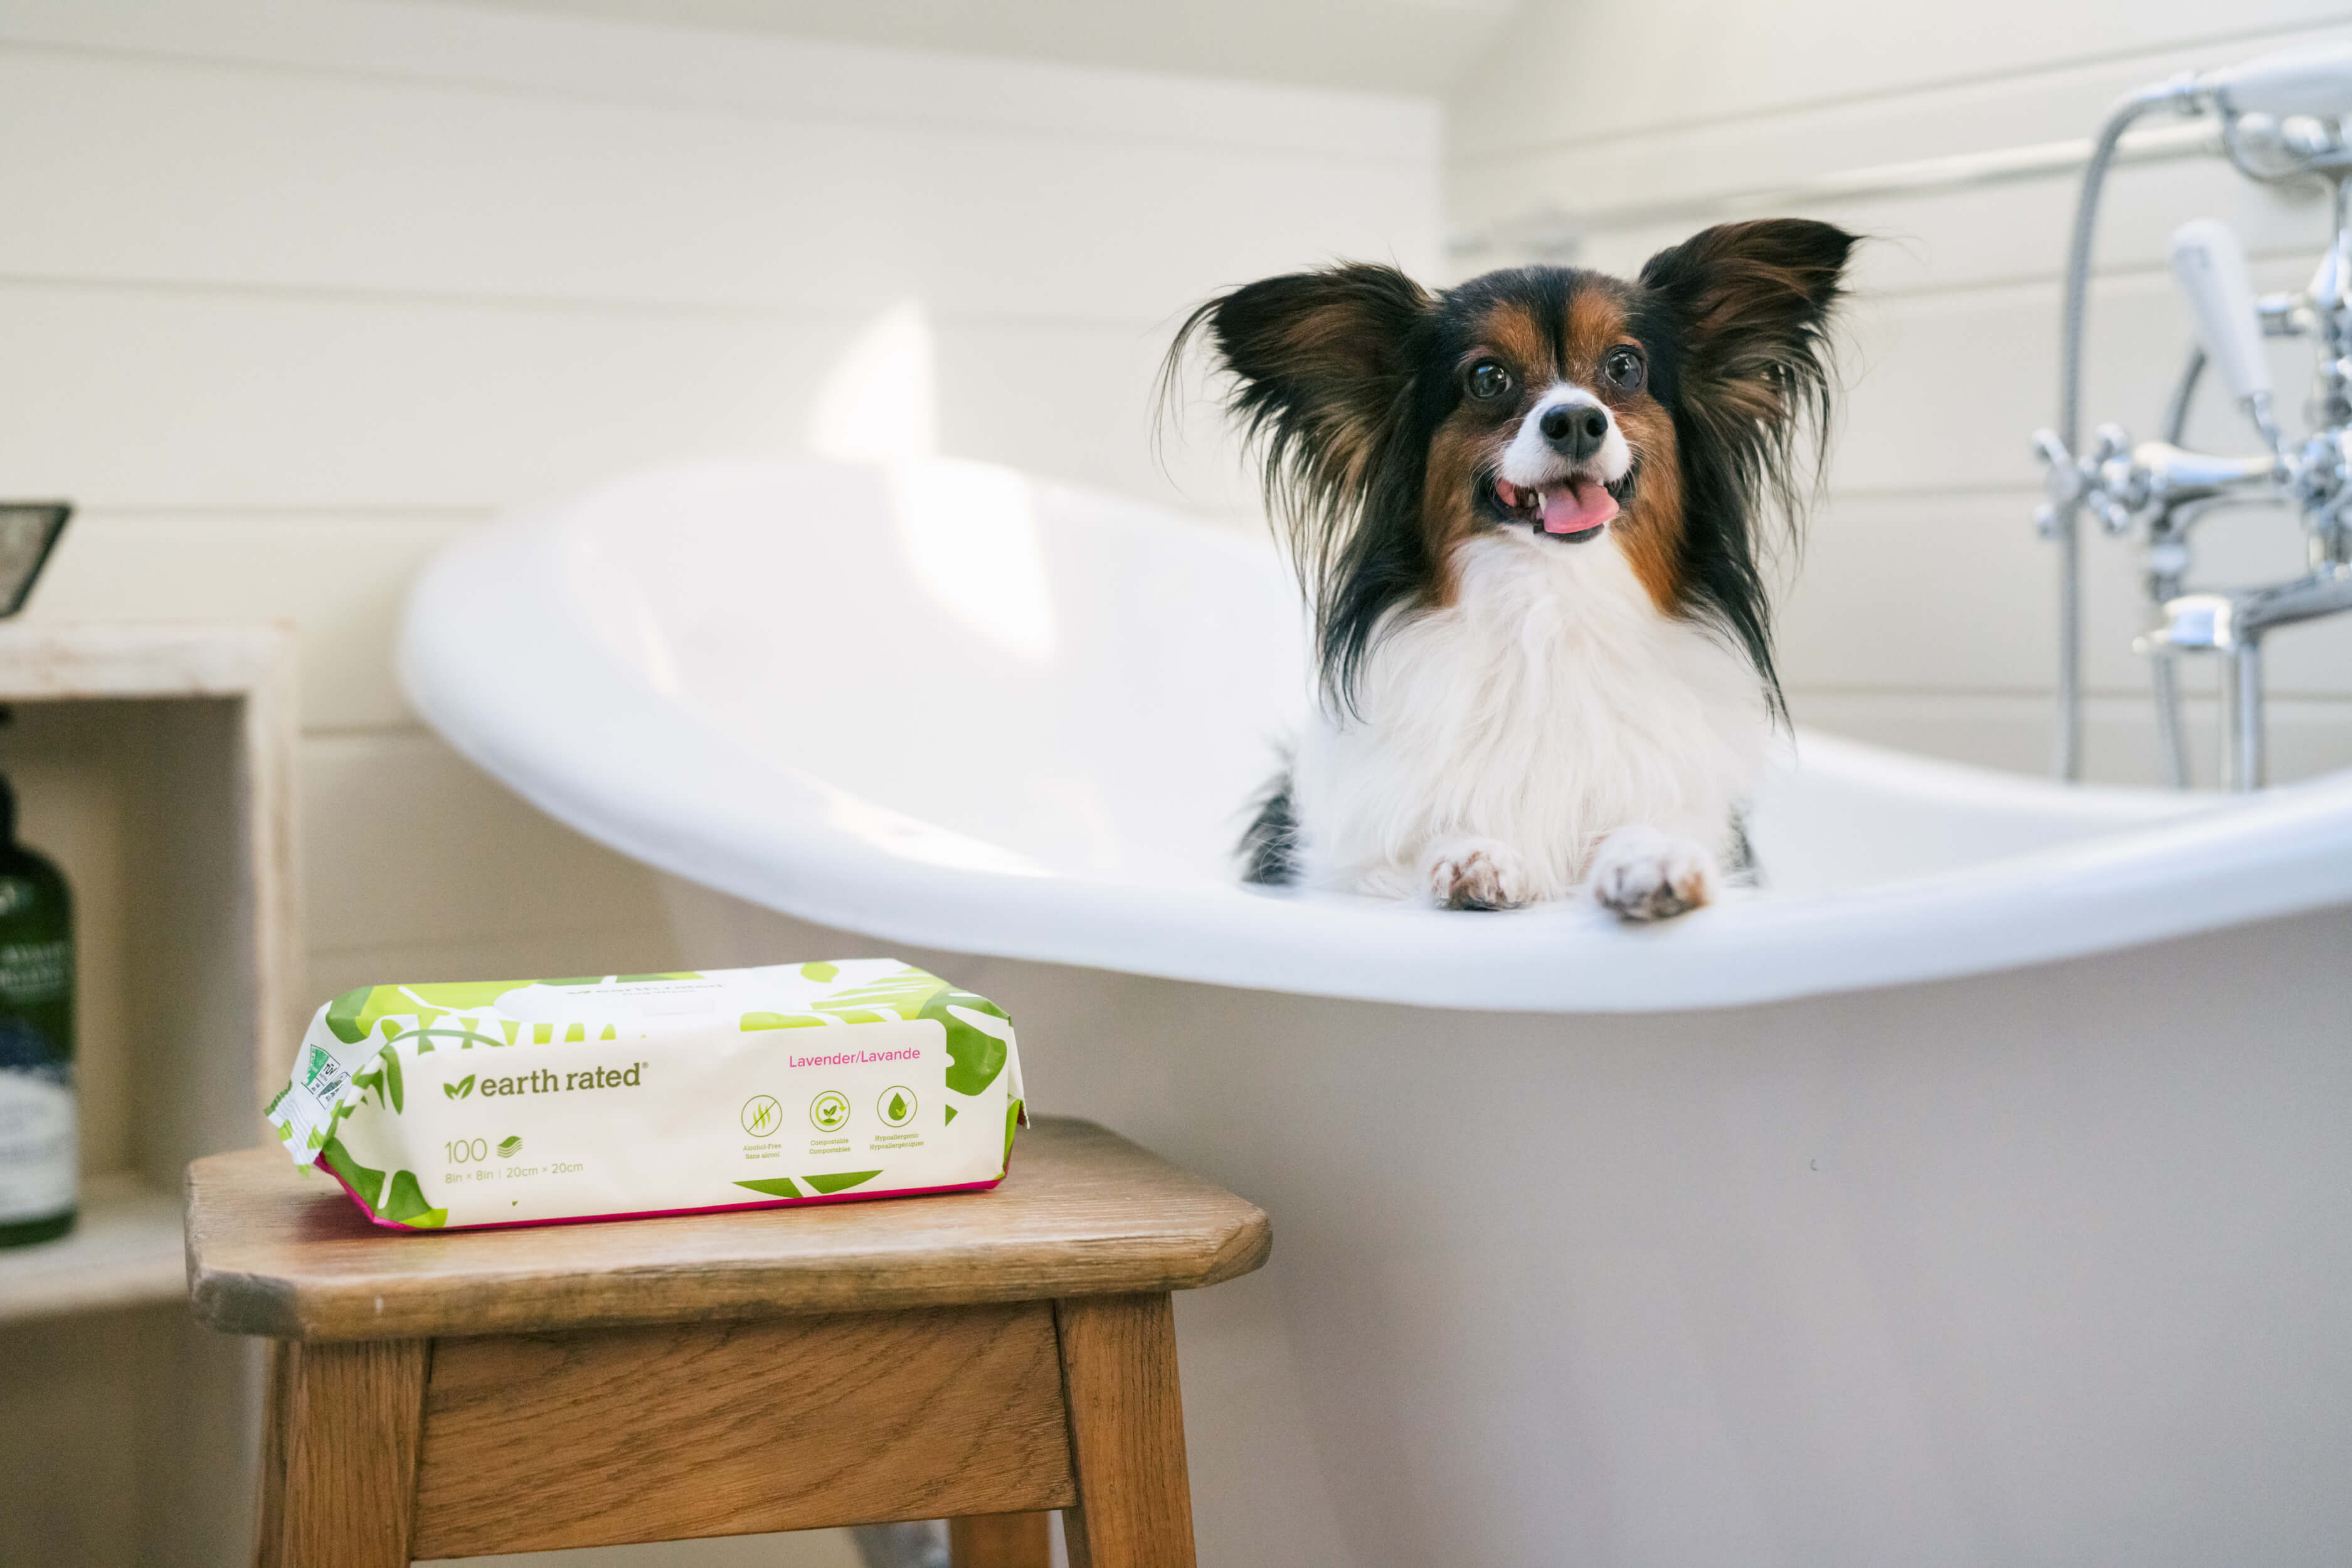 Dog sitting in bubble bath next to earth rated compostable dog grooming wipes